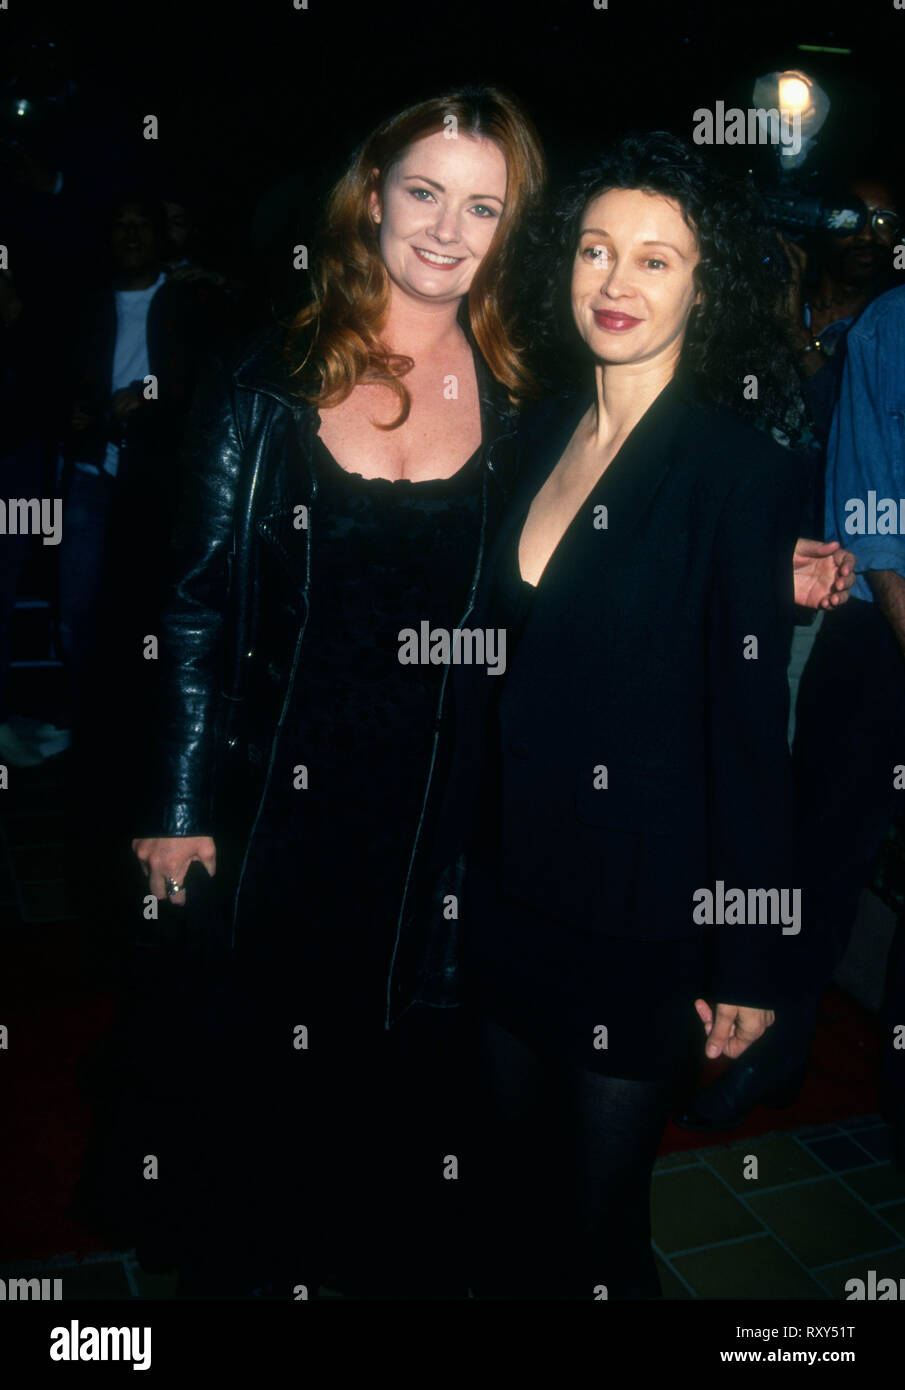 WEST HOLLYWOOD, CA - FEBRUARY 15: Actress Jennifer Nicholson and Jaid Barrymore attend the 'Inevitable Grace' Premiere on February 15, 1994 at the Laemmle's Sunset 5 in West Hollywood, California. Photo by Barry King/Alamy Stock Photo Stock Photo